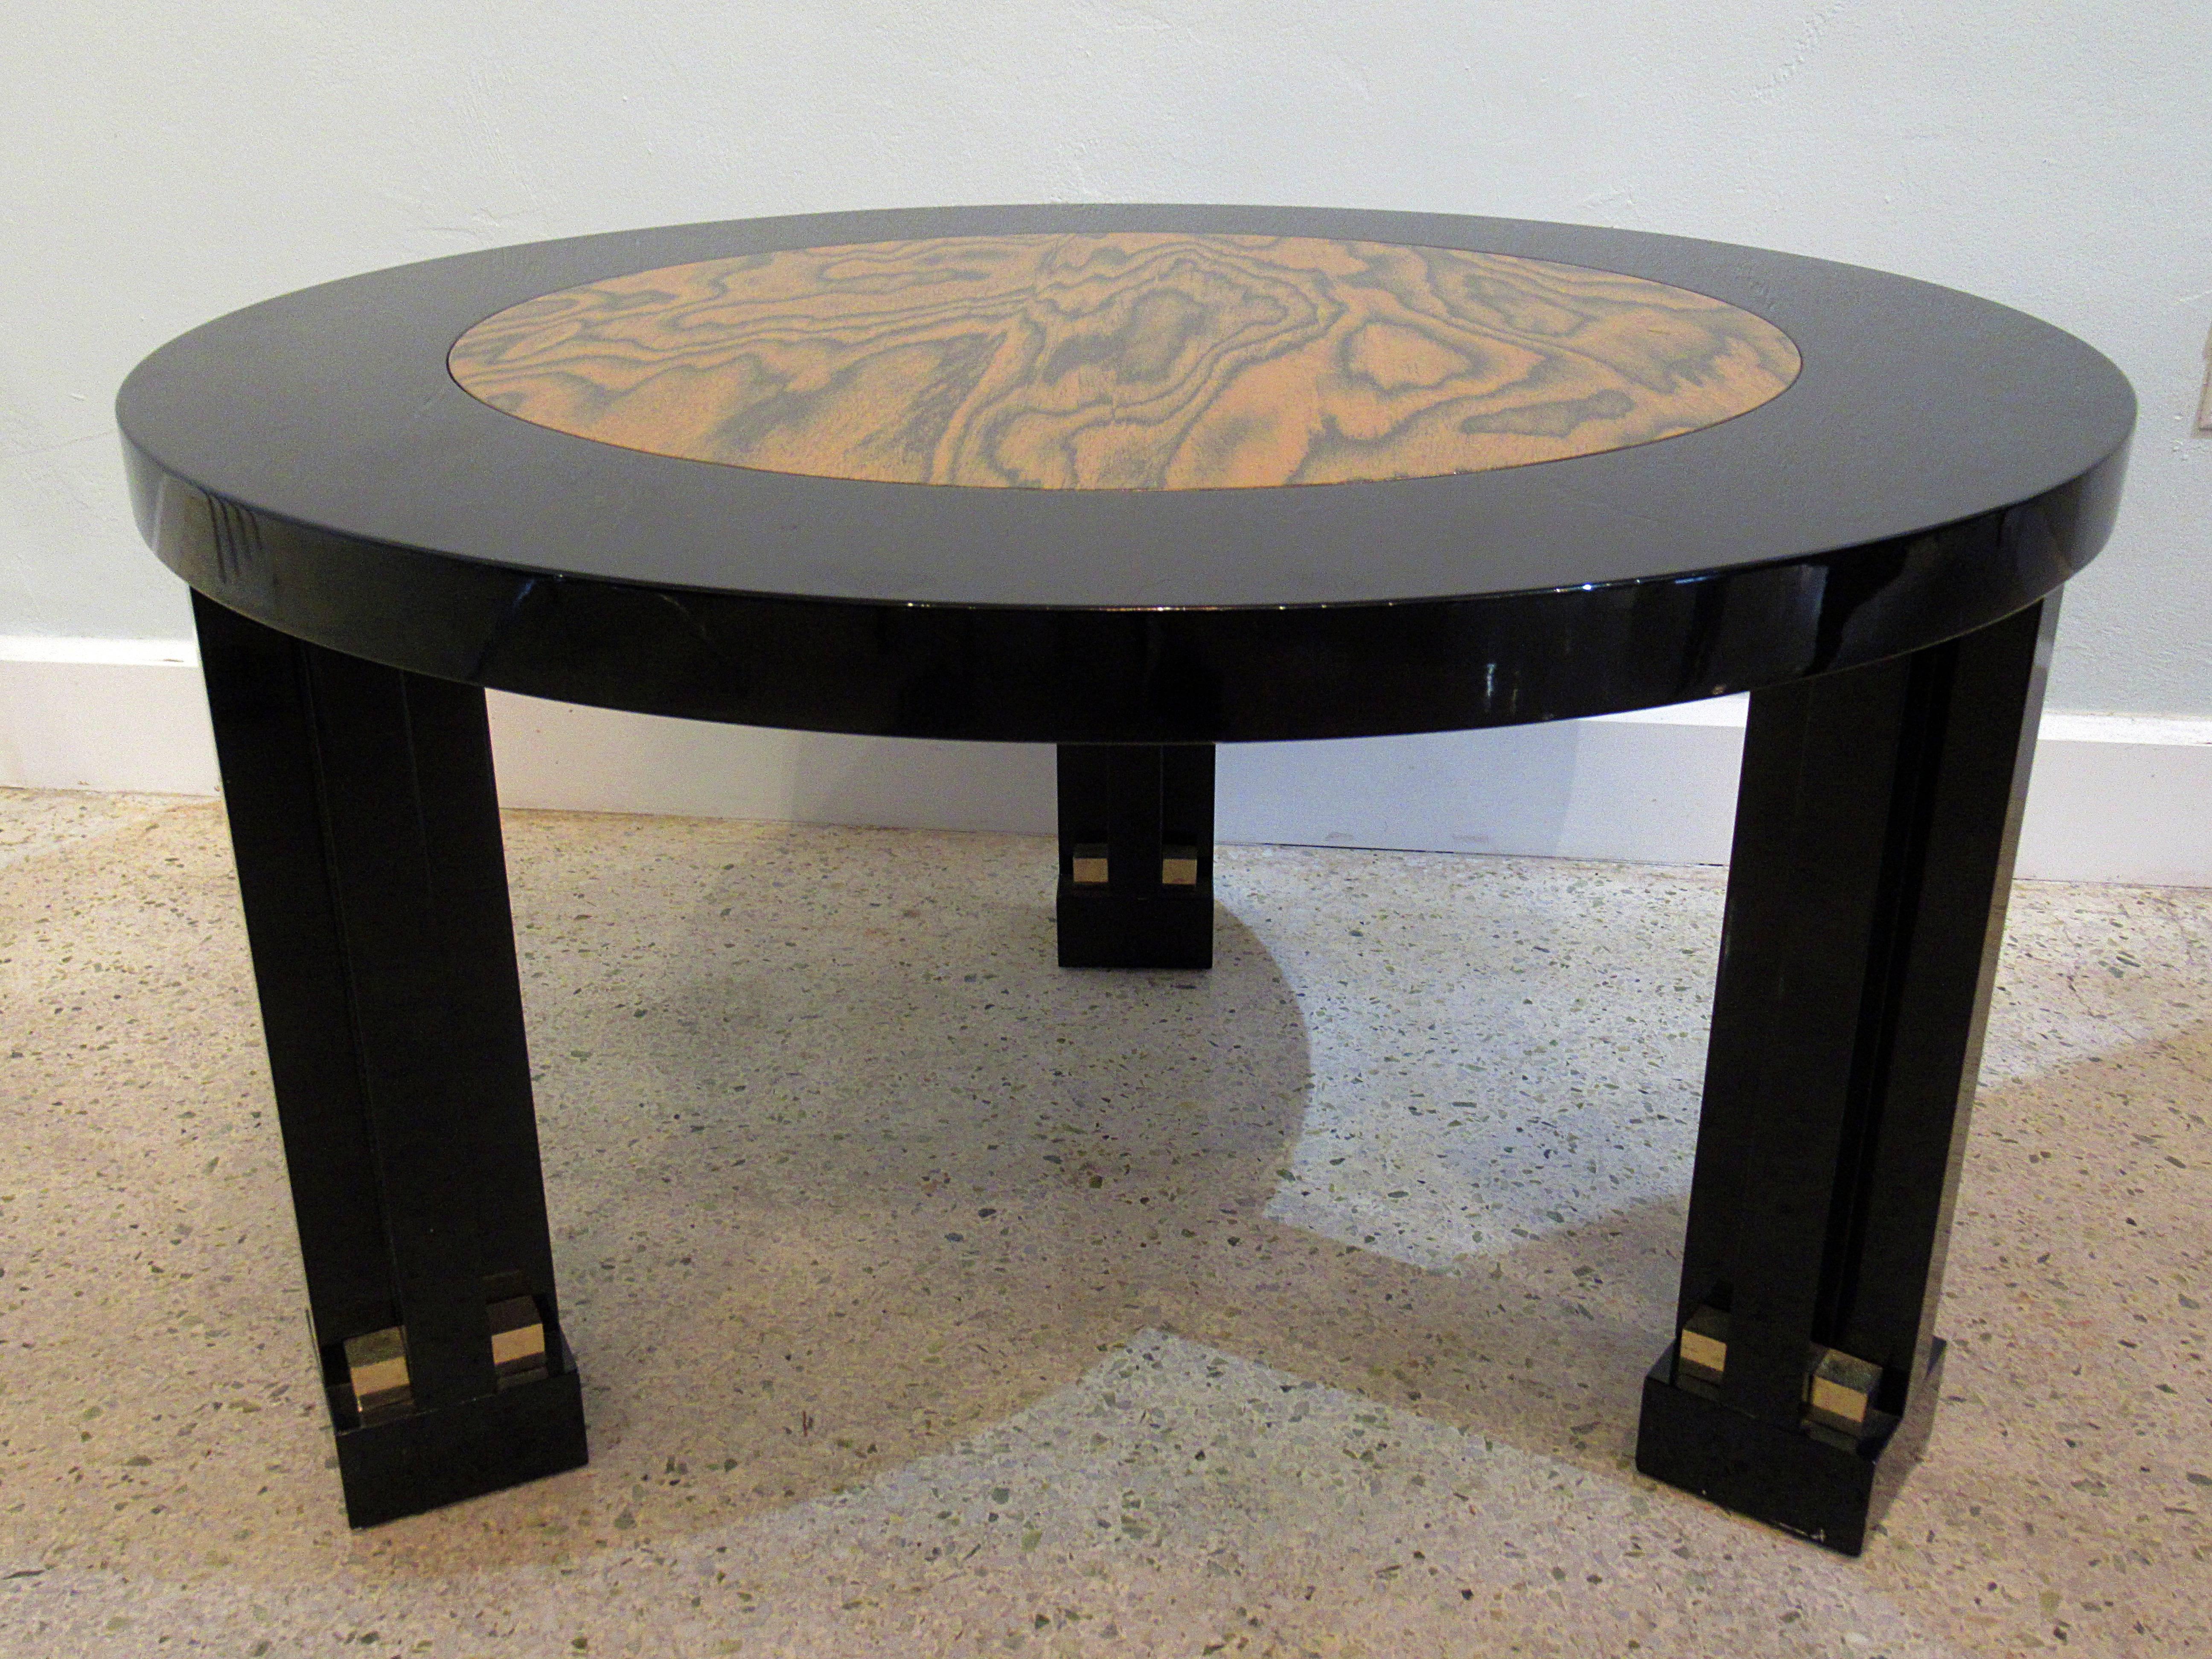 20th Century Rare Italian Black Lacquer and Faux Bois Side Table, 1980s, Ettore Sottsass